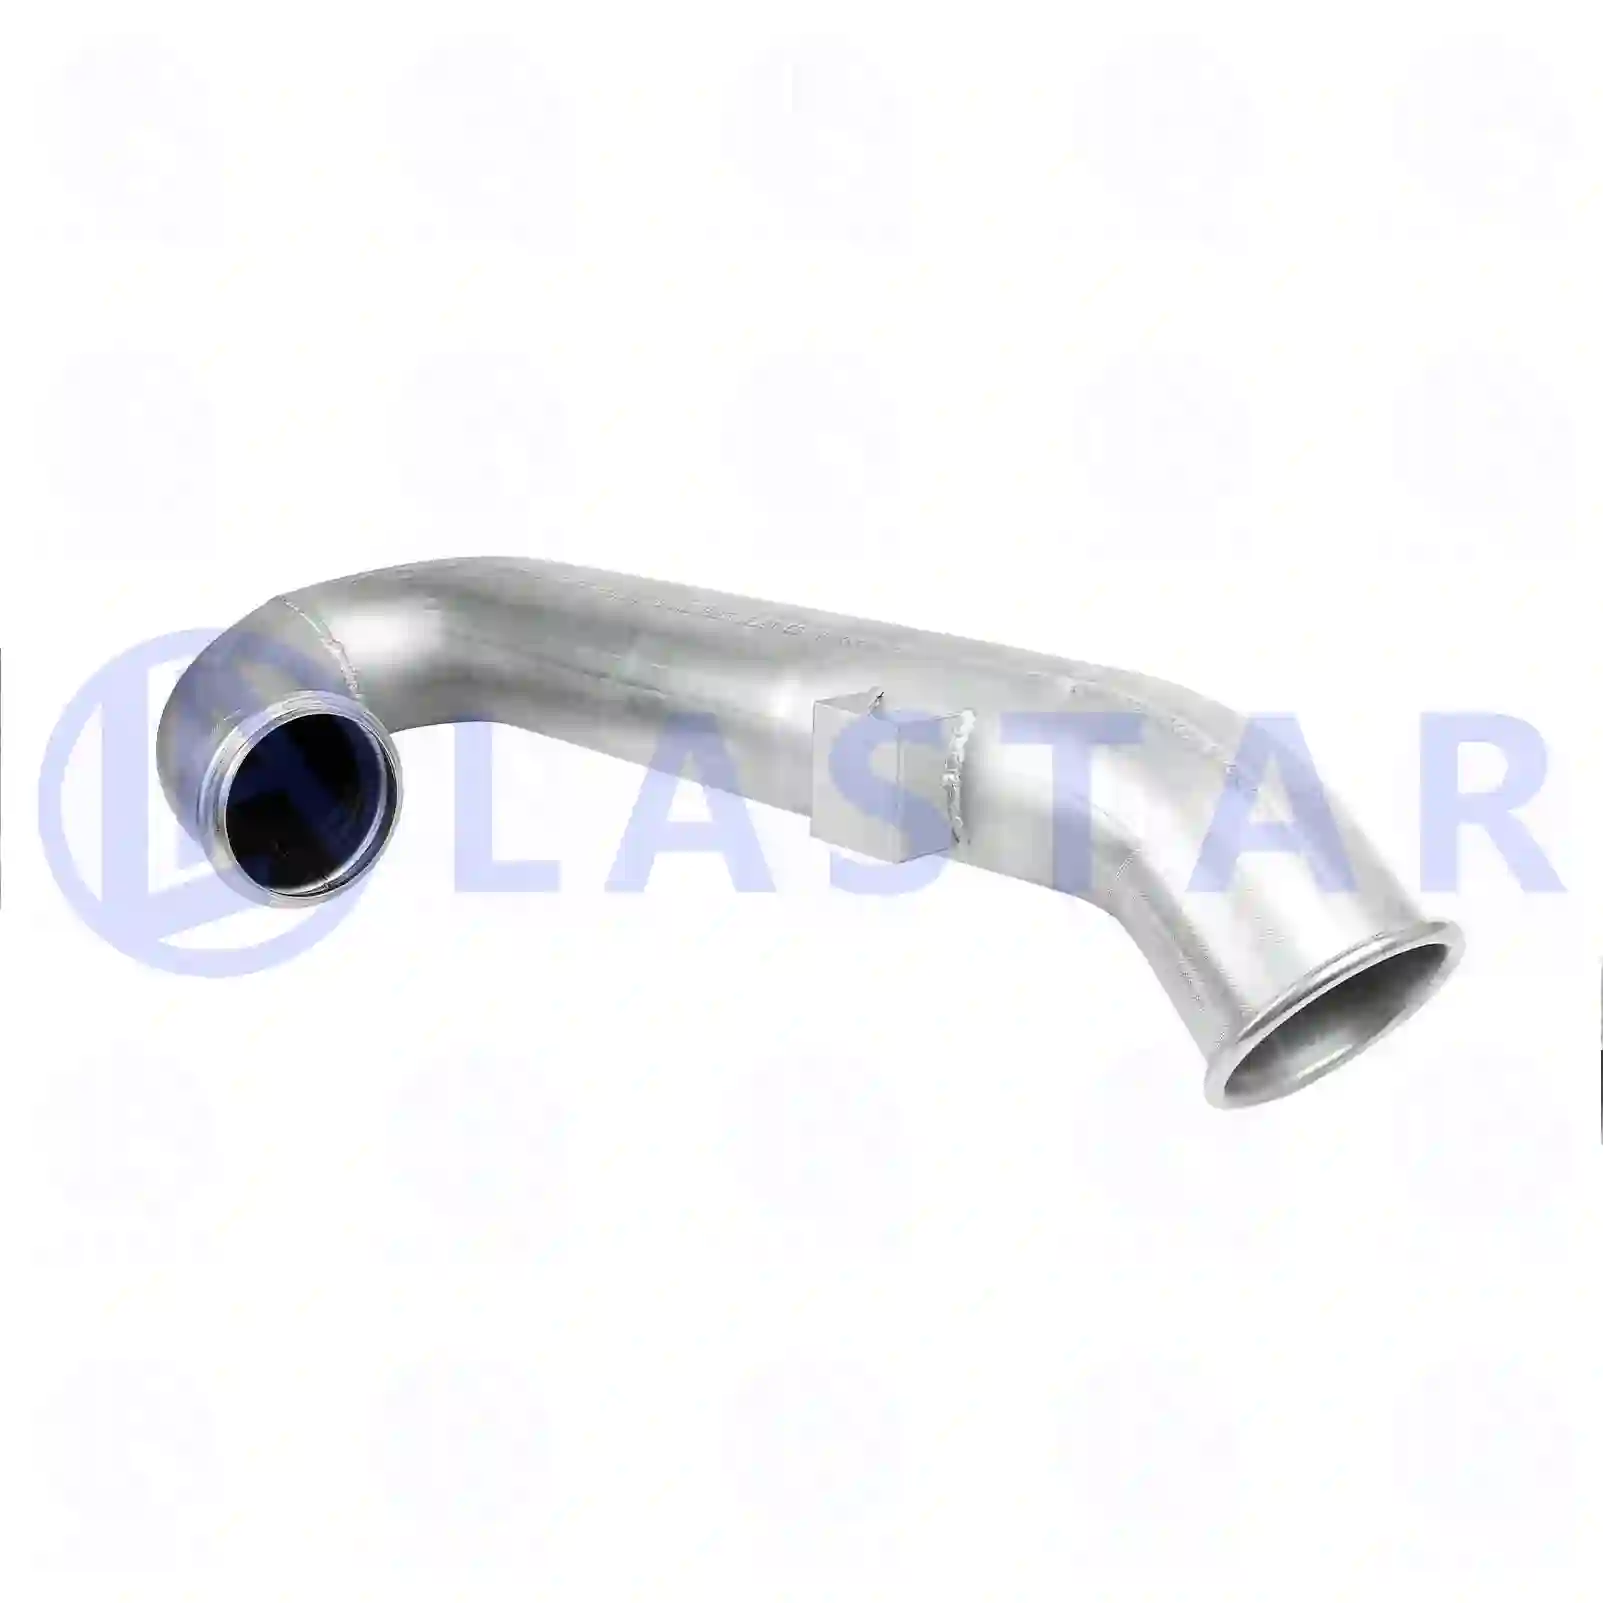 Exhaust pipe, 77706896, 3171446 ||  77706896 Lastar Spare Part | Truck Spare Parts, Auotomotive Spare Parts Exhaust pipe, 77706896, 3171446 ||  77706896 Lastar Spare Part | Truck Spare Parts, Auotomotive Spare Parts